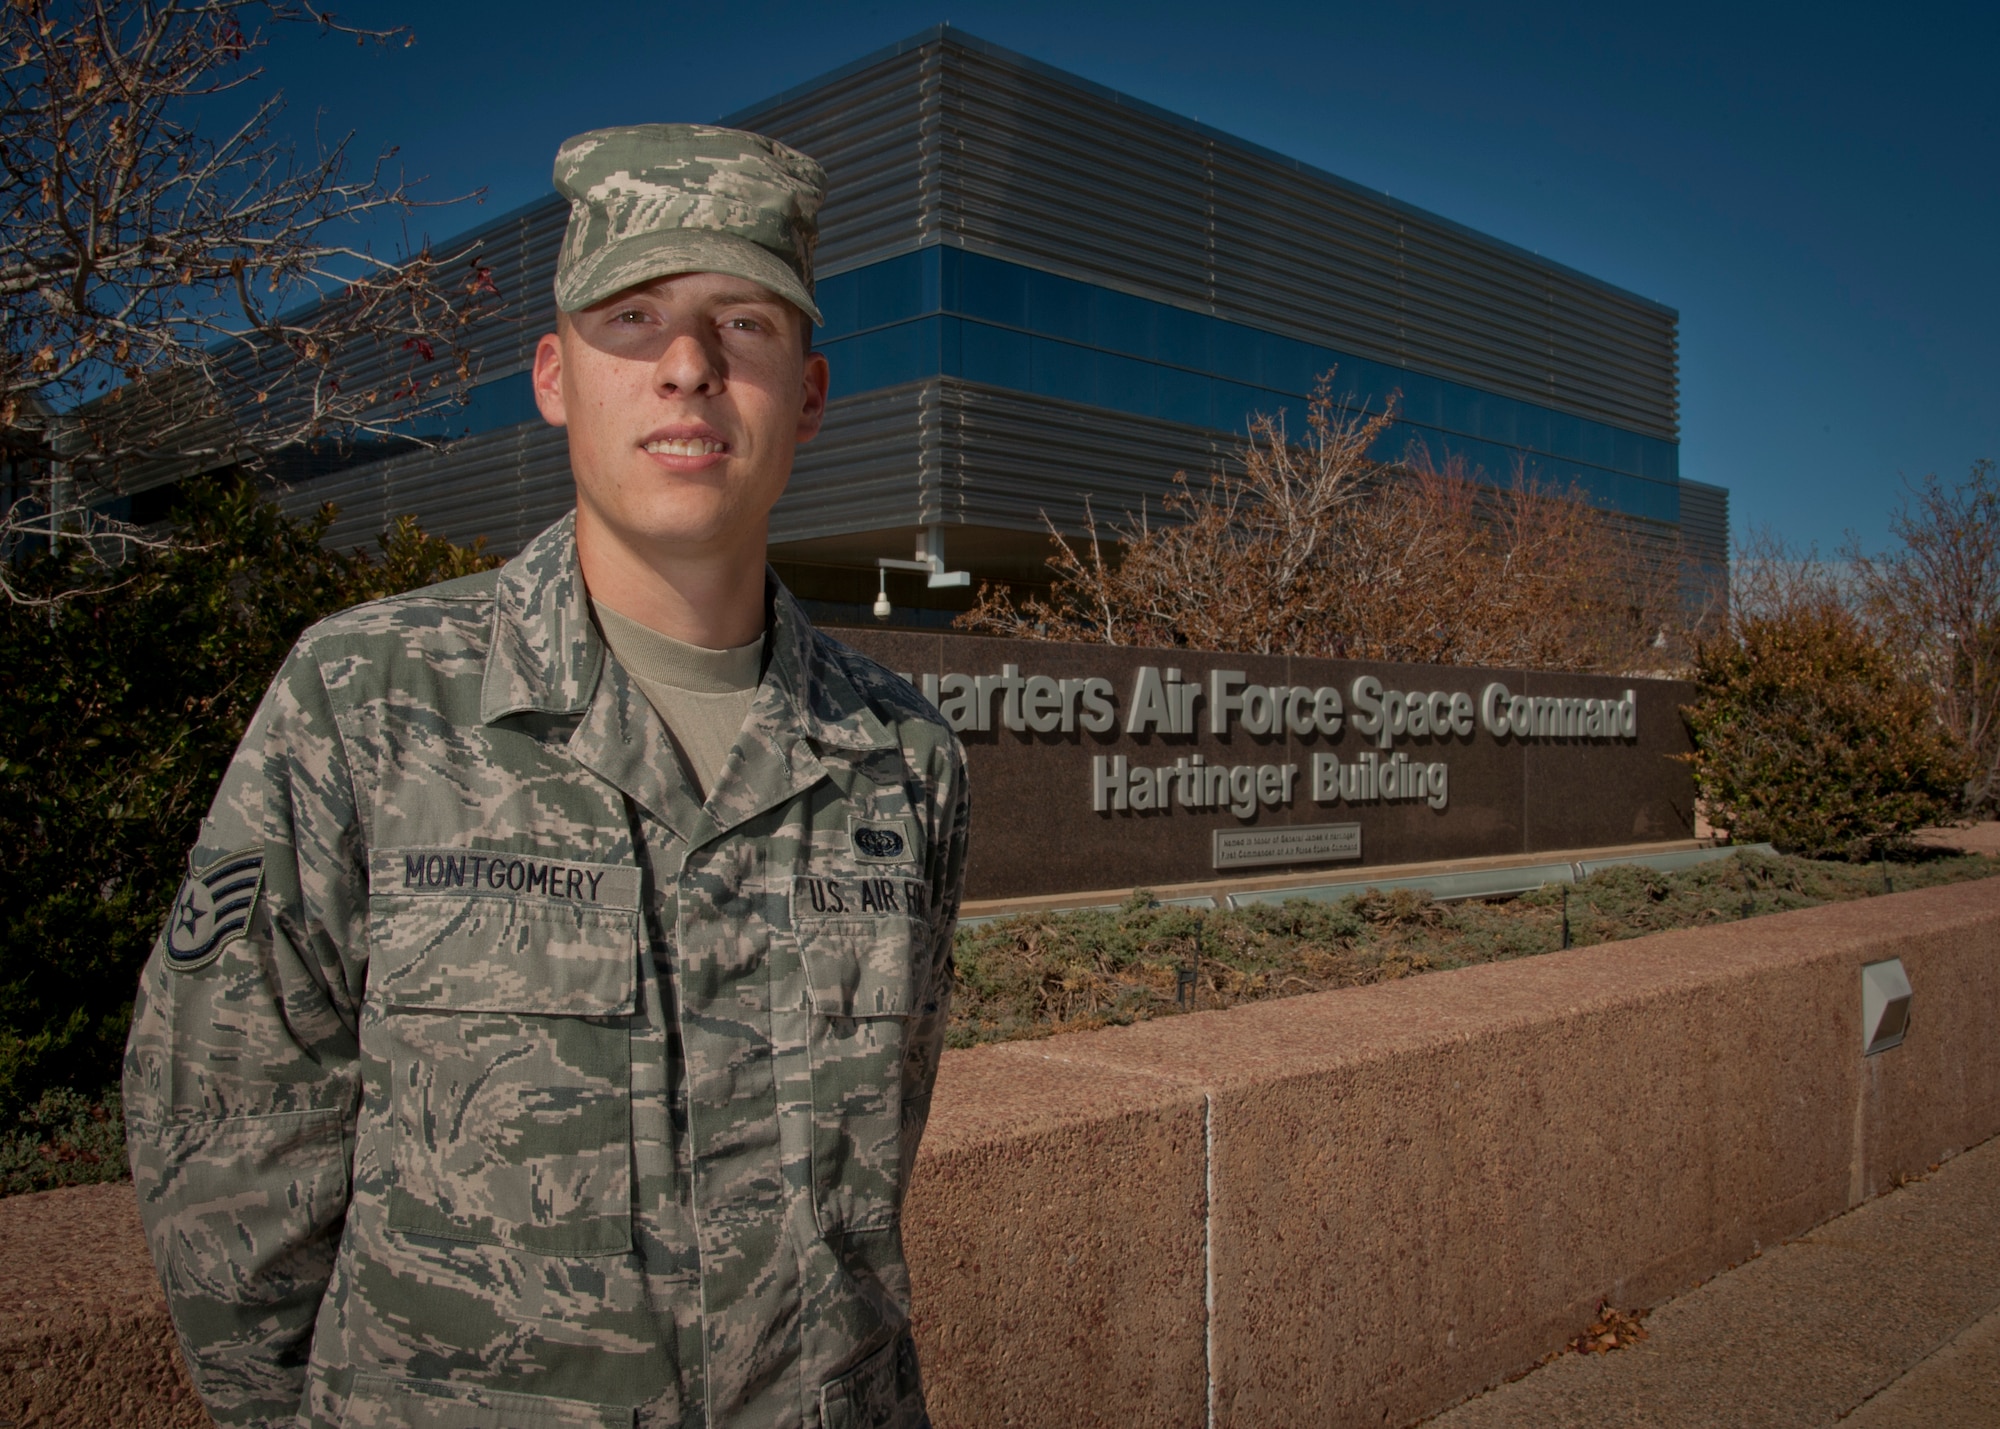 PETERSON AIR FORCE BASE, Colo. – Staff Sgt. Holden Montgomery, Air Force Space Command administration support technician, poses for a photograph outside of the Air Force Space Command headquarters building Oct. 29. ‘Monty’ deployed in 2010 to Kandahar Air Field, Afghanistan during which his base was subject to 86 rocket attacks and two ground attacks. As a result of his experiences he was diagnosed with post-traumatic stress disorder. Now receiving treatment for PTSD, Monty continues to serve his country doing the job he loves. Montgomery is one of the speaker’s in this year’s Storytellers event from 9-11 a.m. Nov. 21 in the ballroom at The Club. (U.S. Air Force photo/Staff Sgt. J. Aaron Breeden)